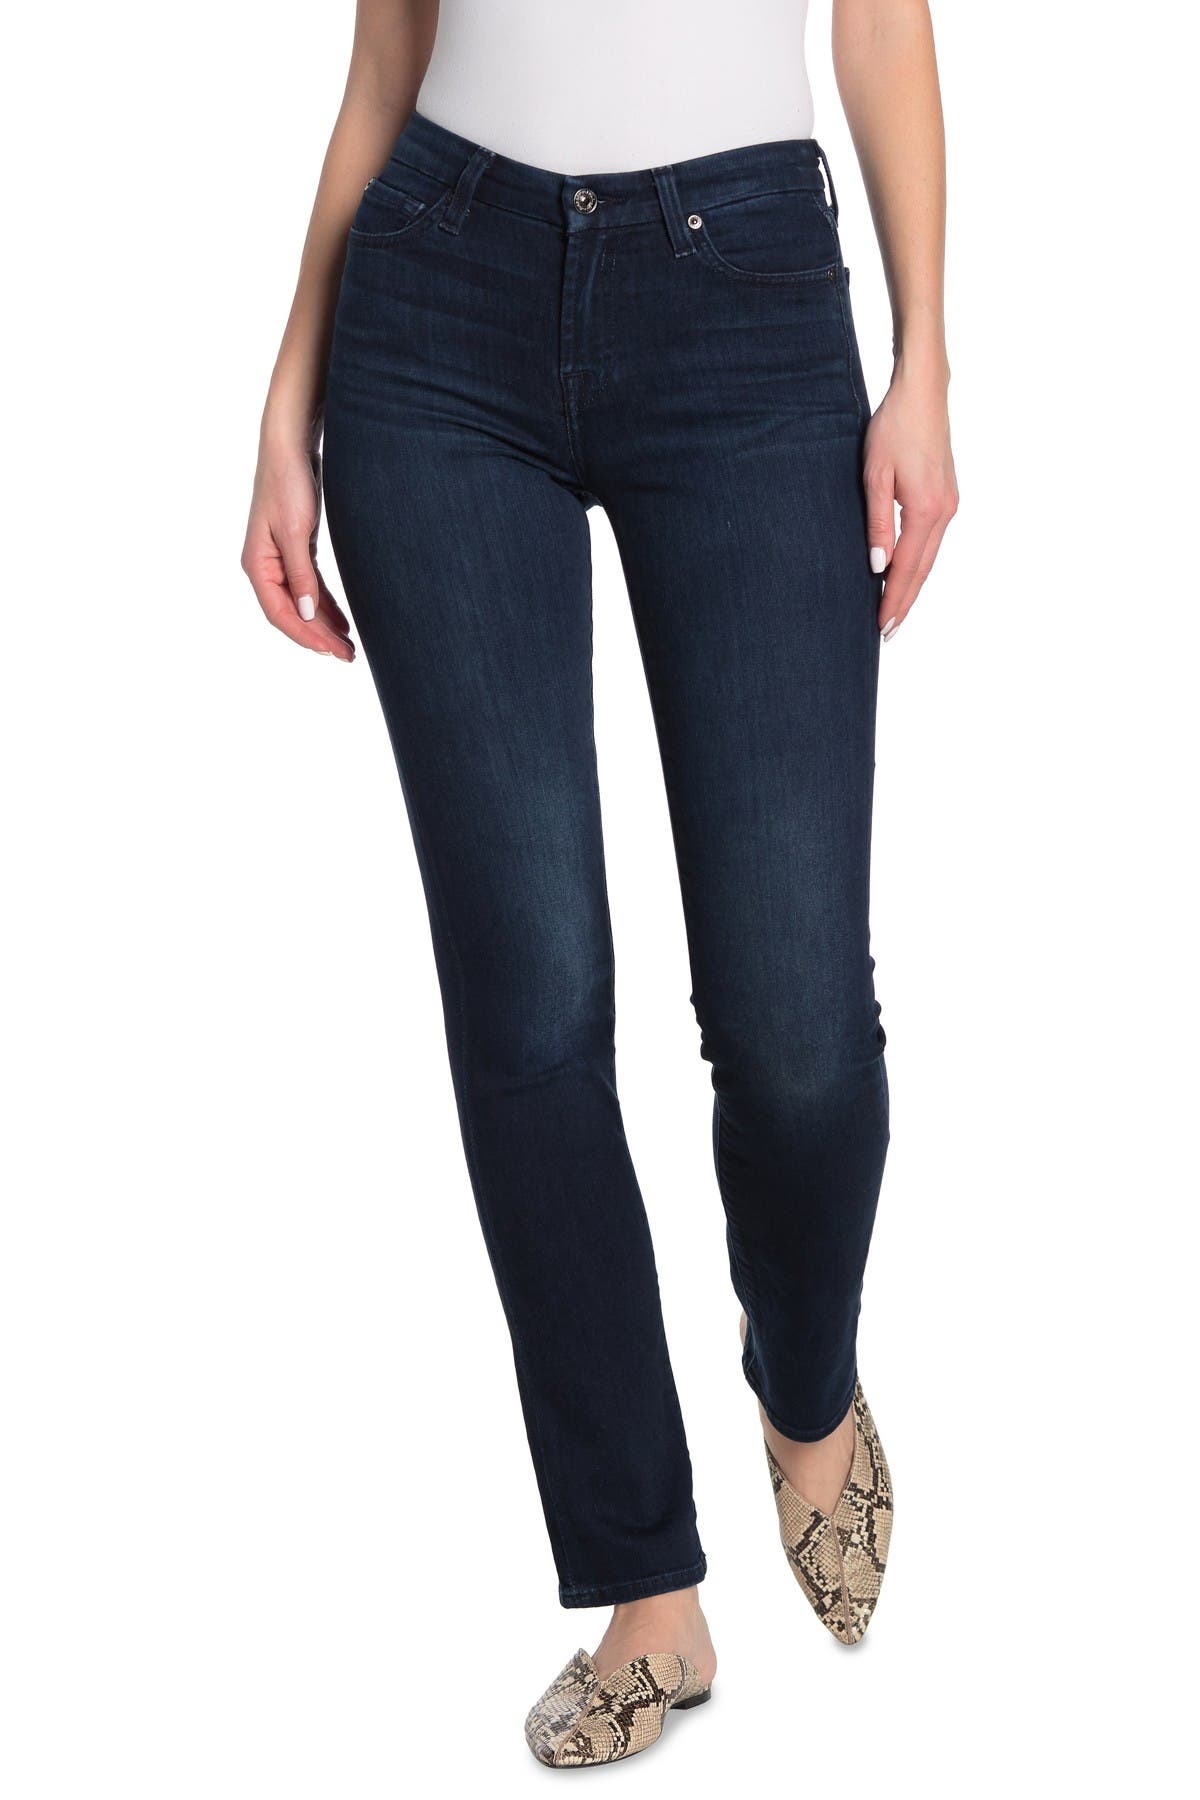 kimmie 7 for all mankind jeans